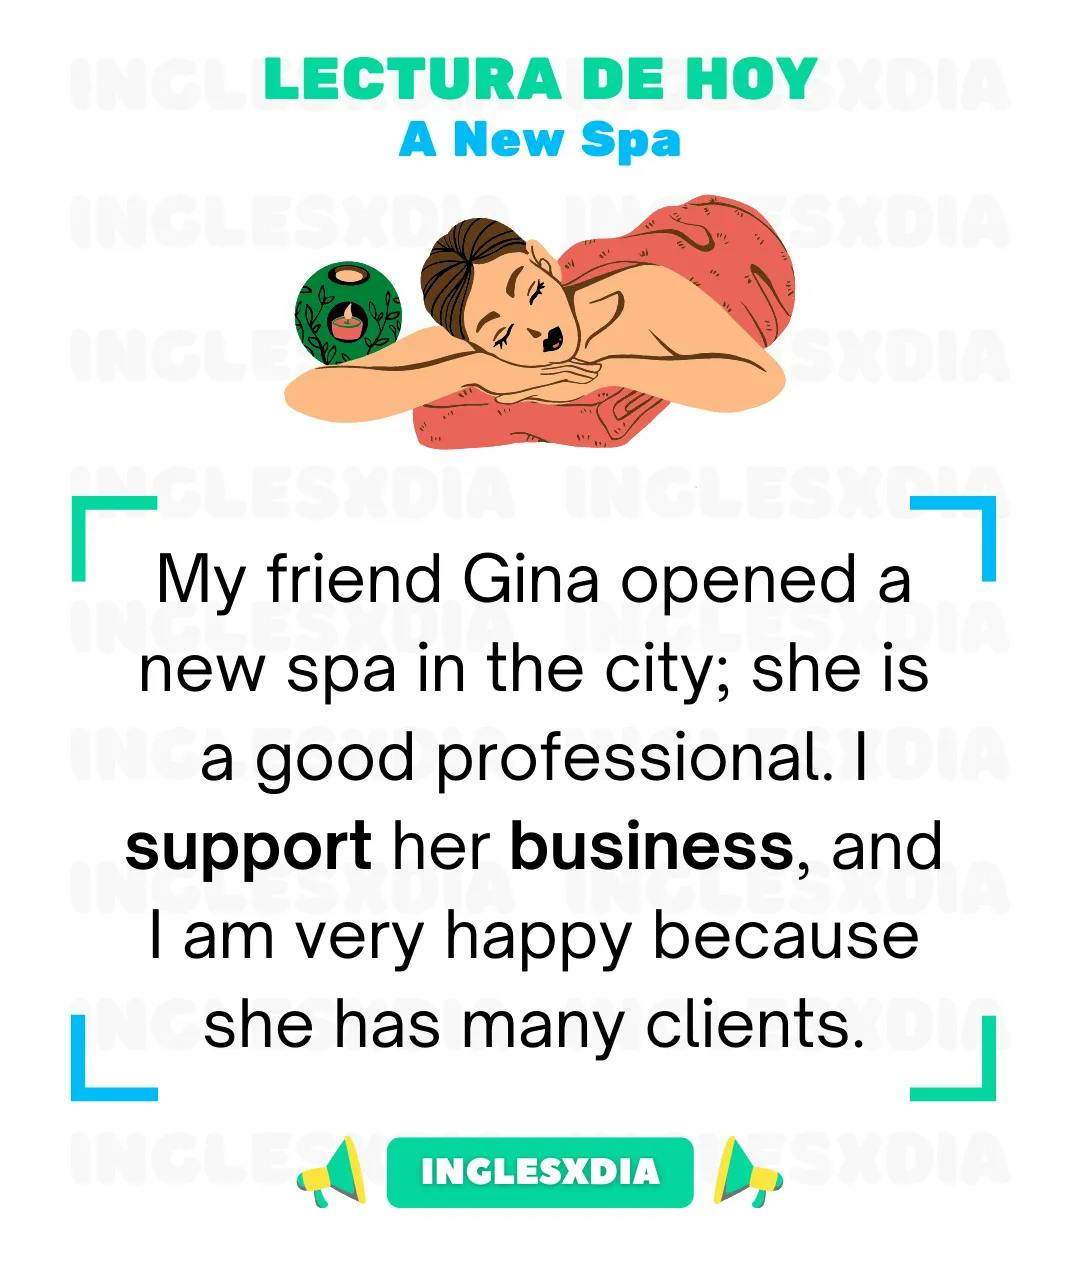 A New Spa